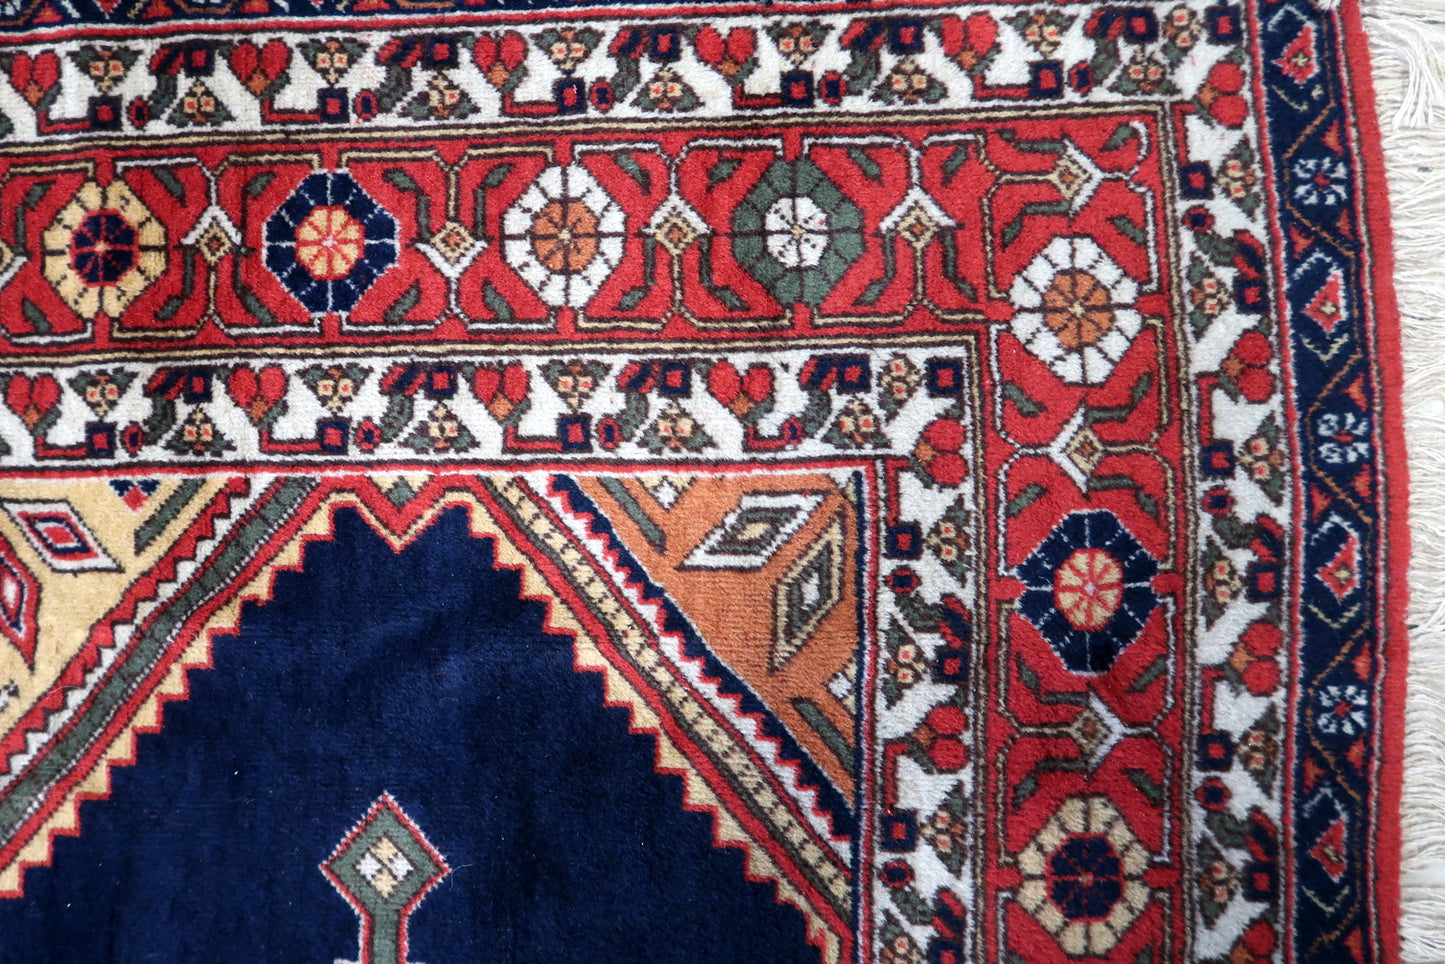 Overhead shot of the Persian style Afshar rug displaying its intricate border details